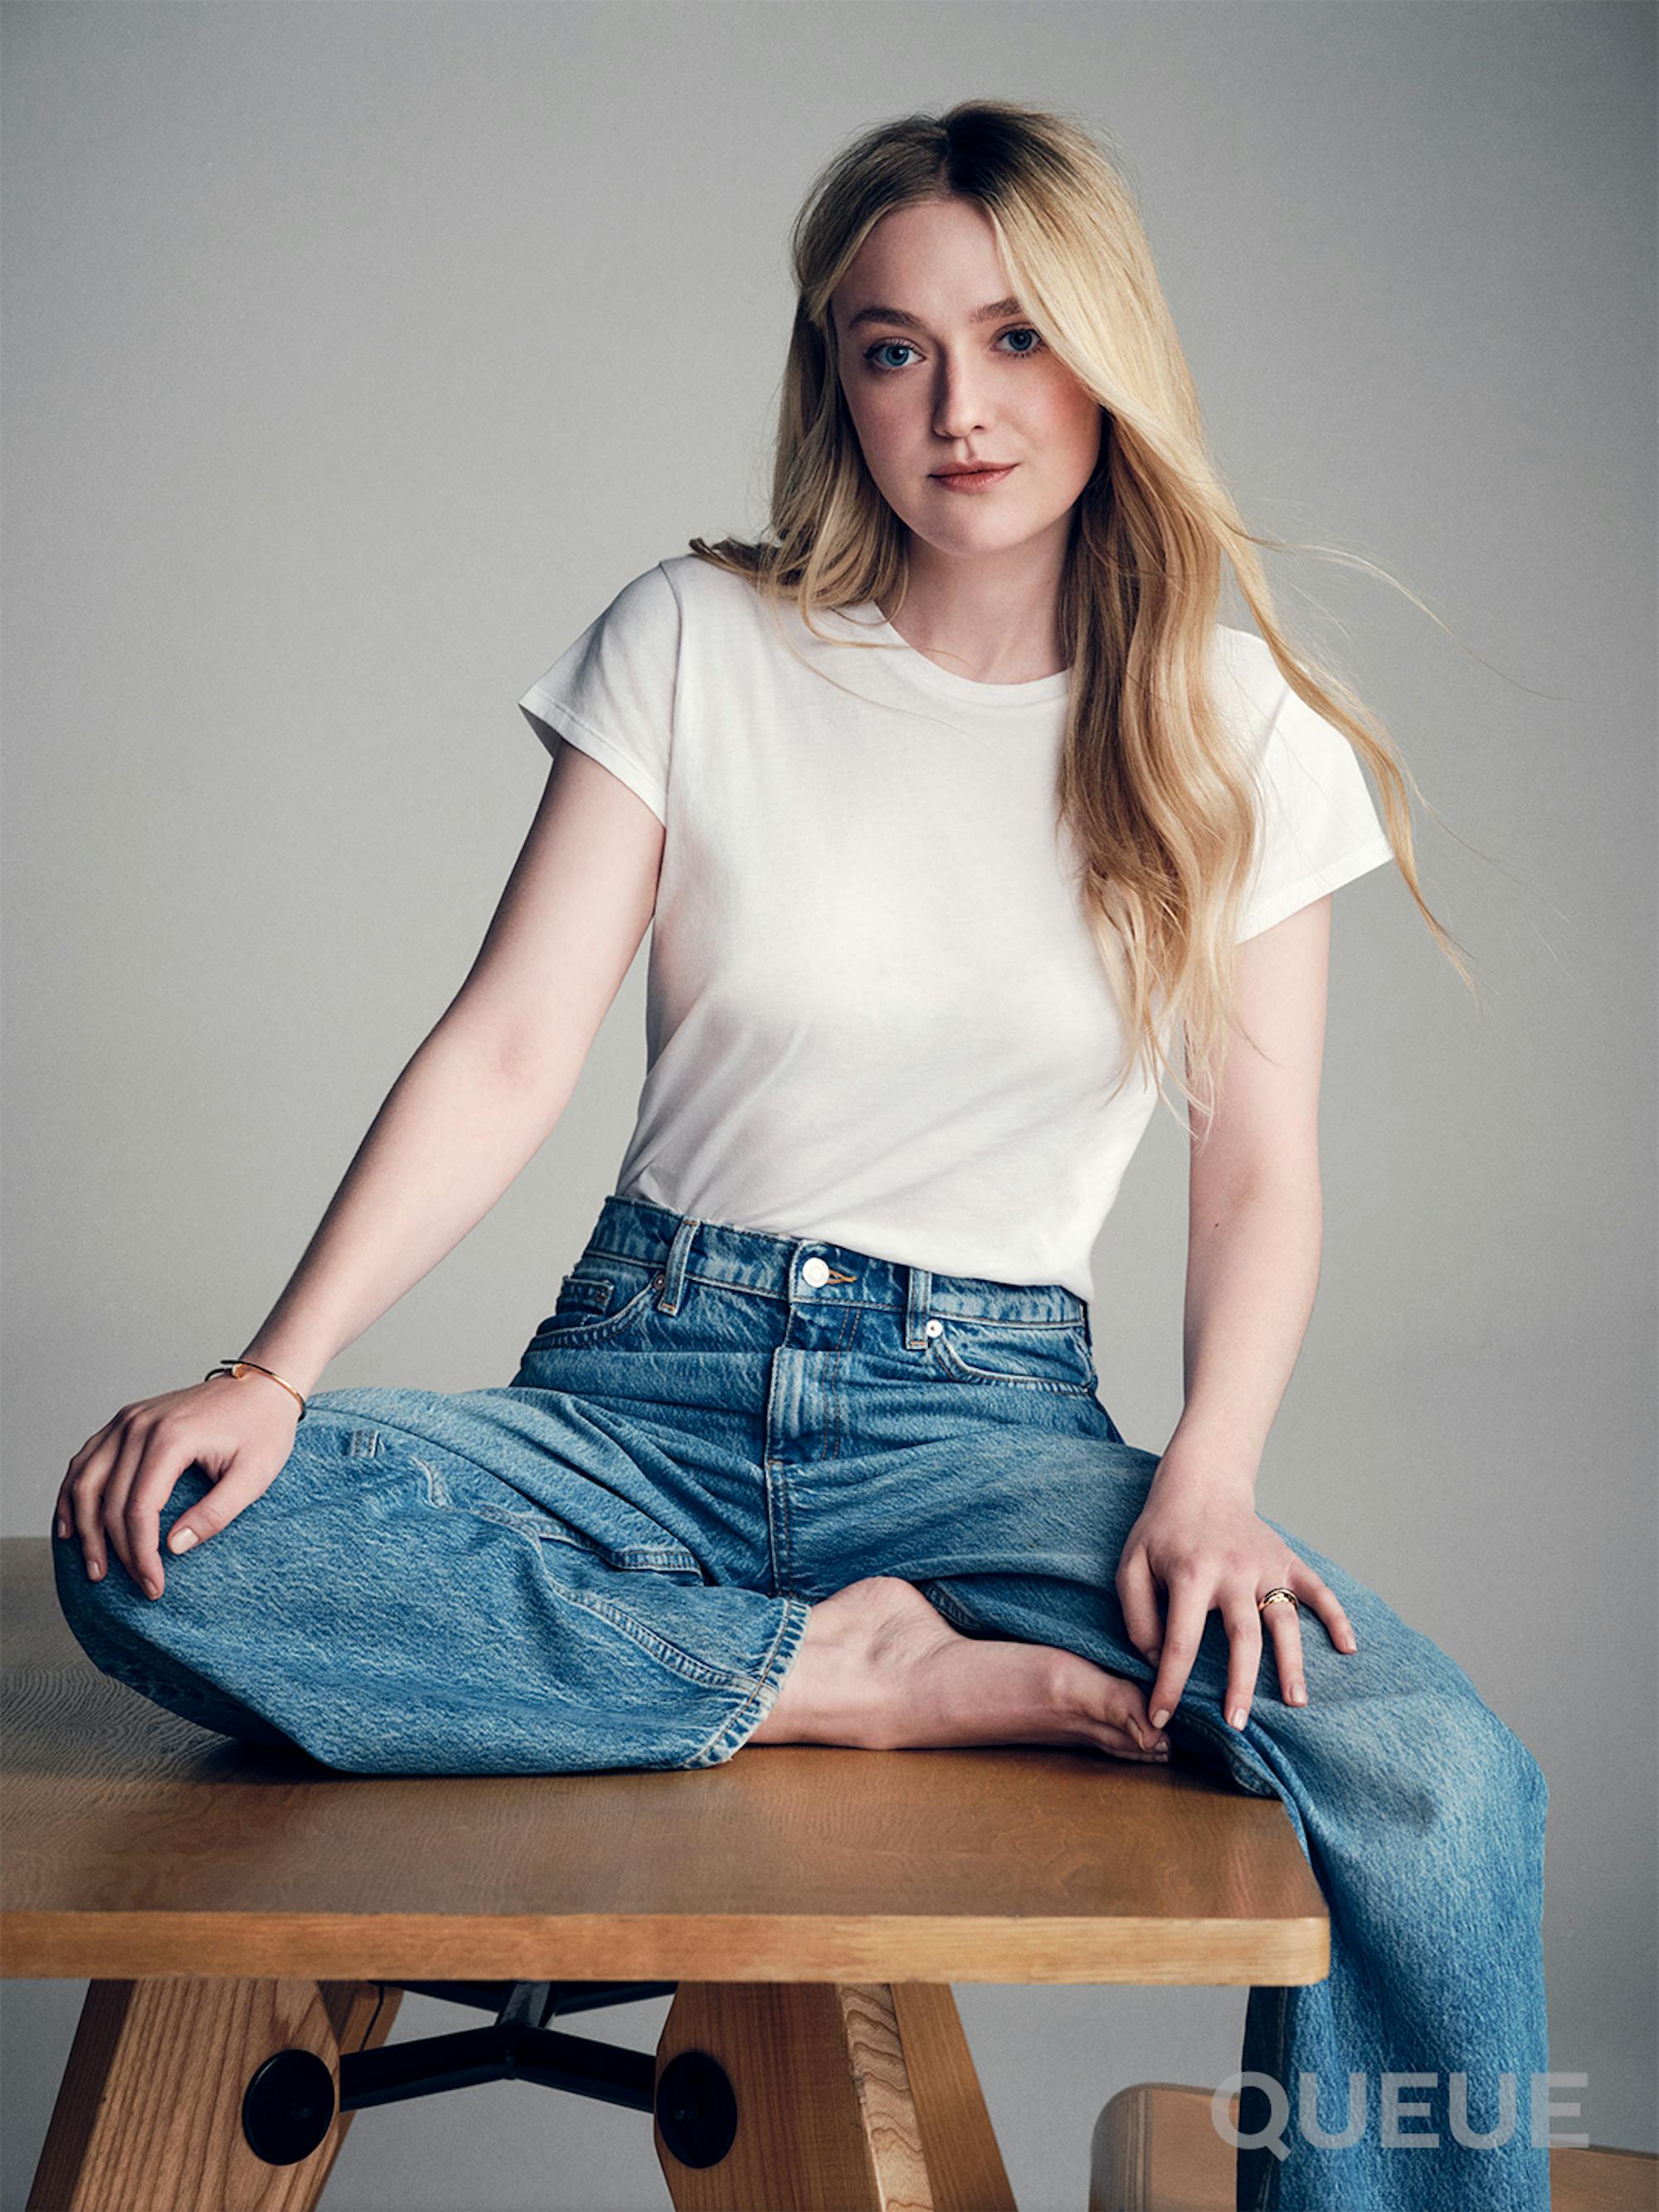 Dakota Fanning wears a white shirt and blue jeans and sits on a wooden table.